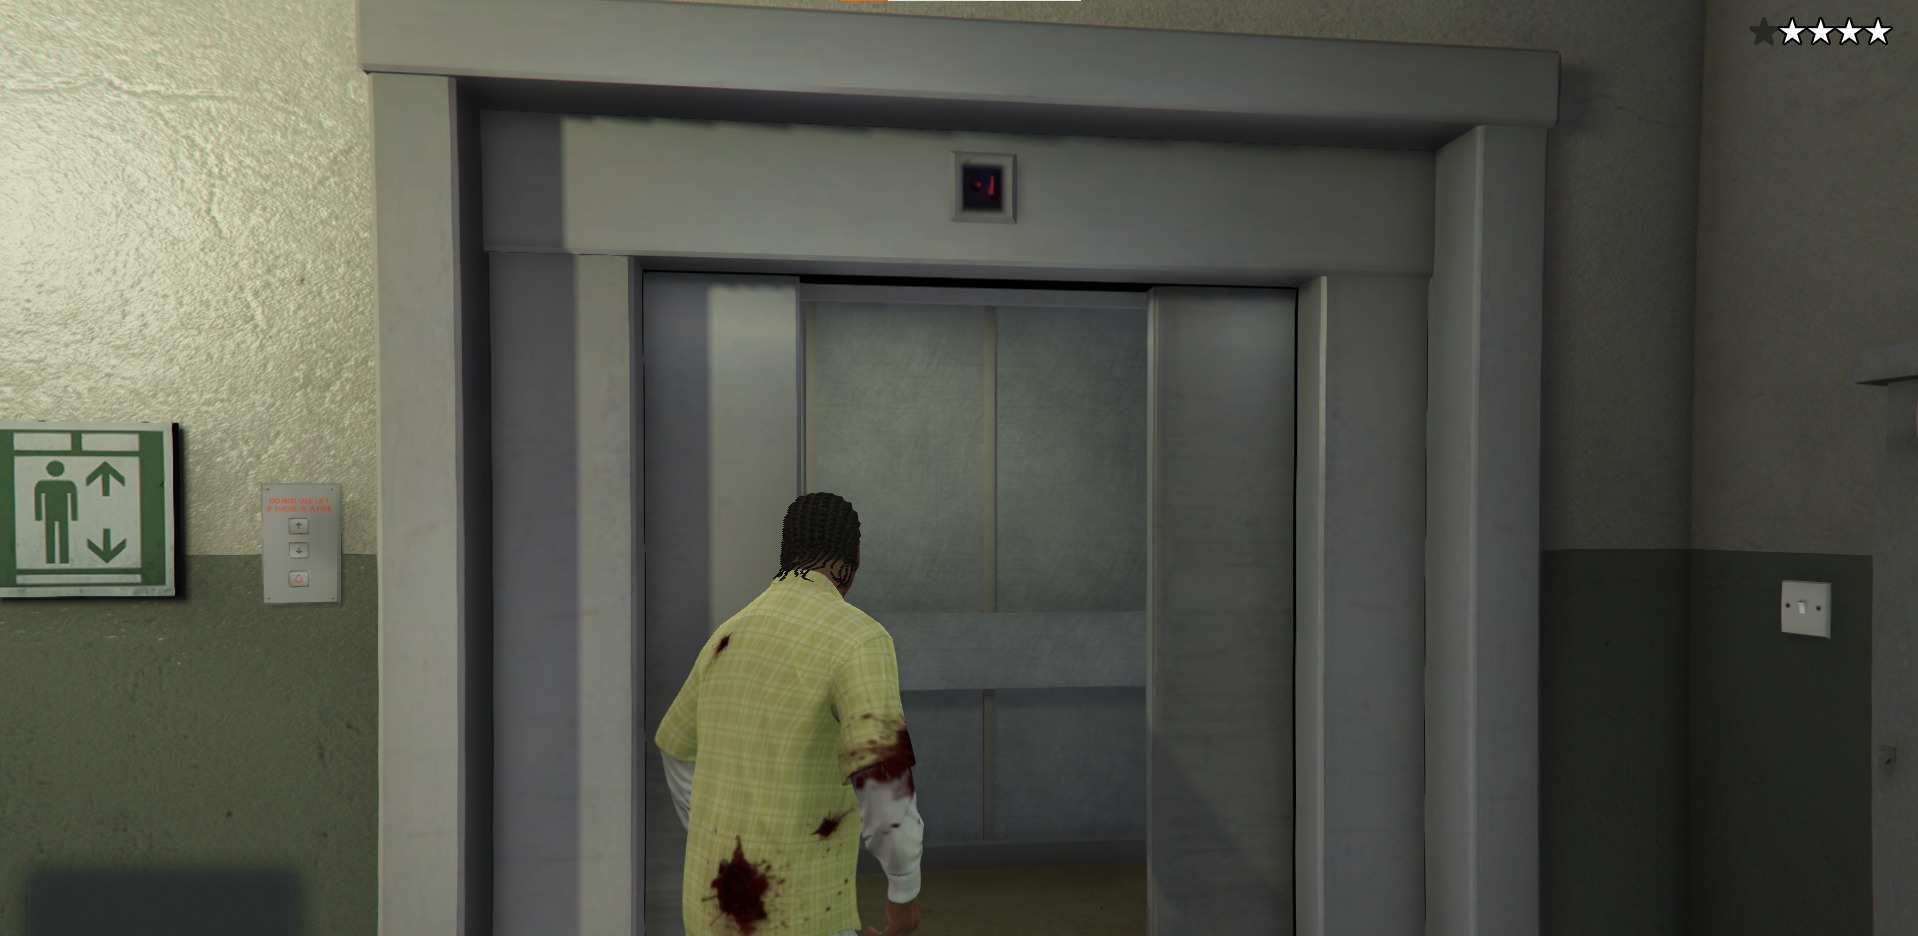 You can enter Elevators in GTA 5 but you cannot use them to move to other floors. 